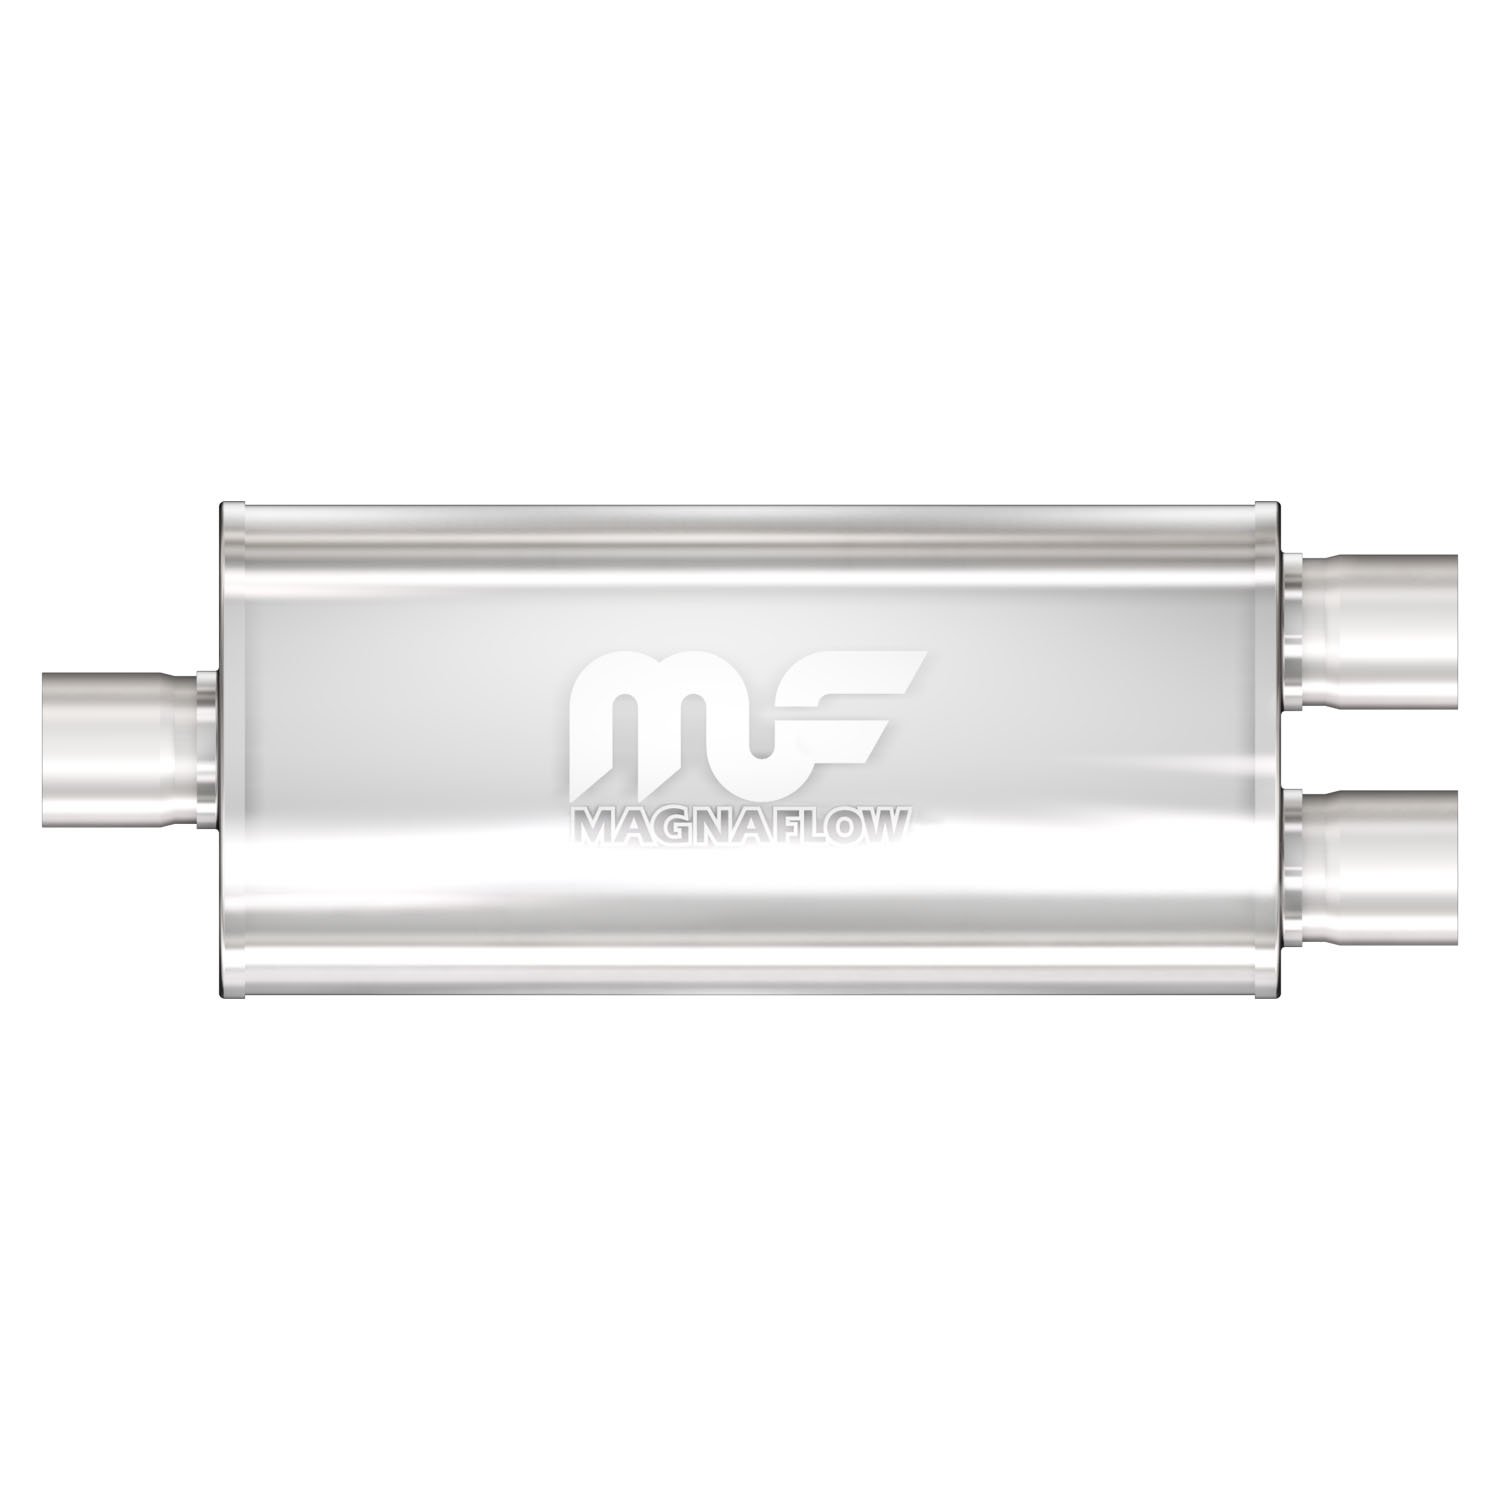 5" x 8" Oval Muffler Center In/Dual Out: 3" /2.25" Body Length: 18" Overall Length: 24" Core Size: 3" Polished Finish